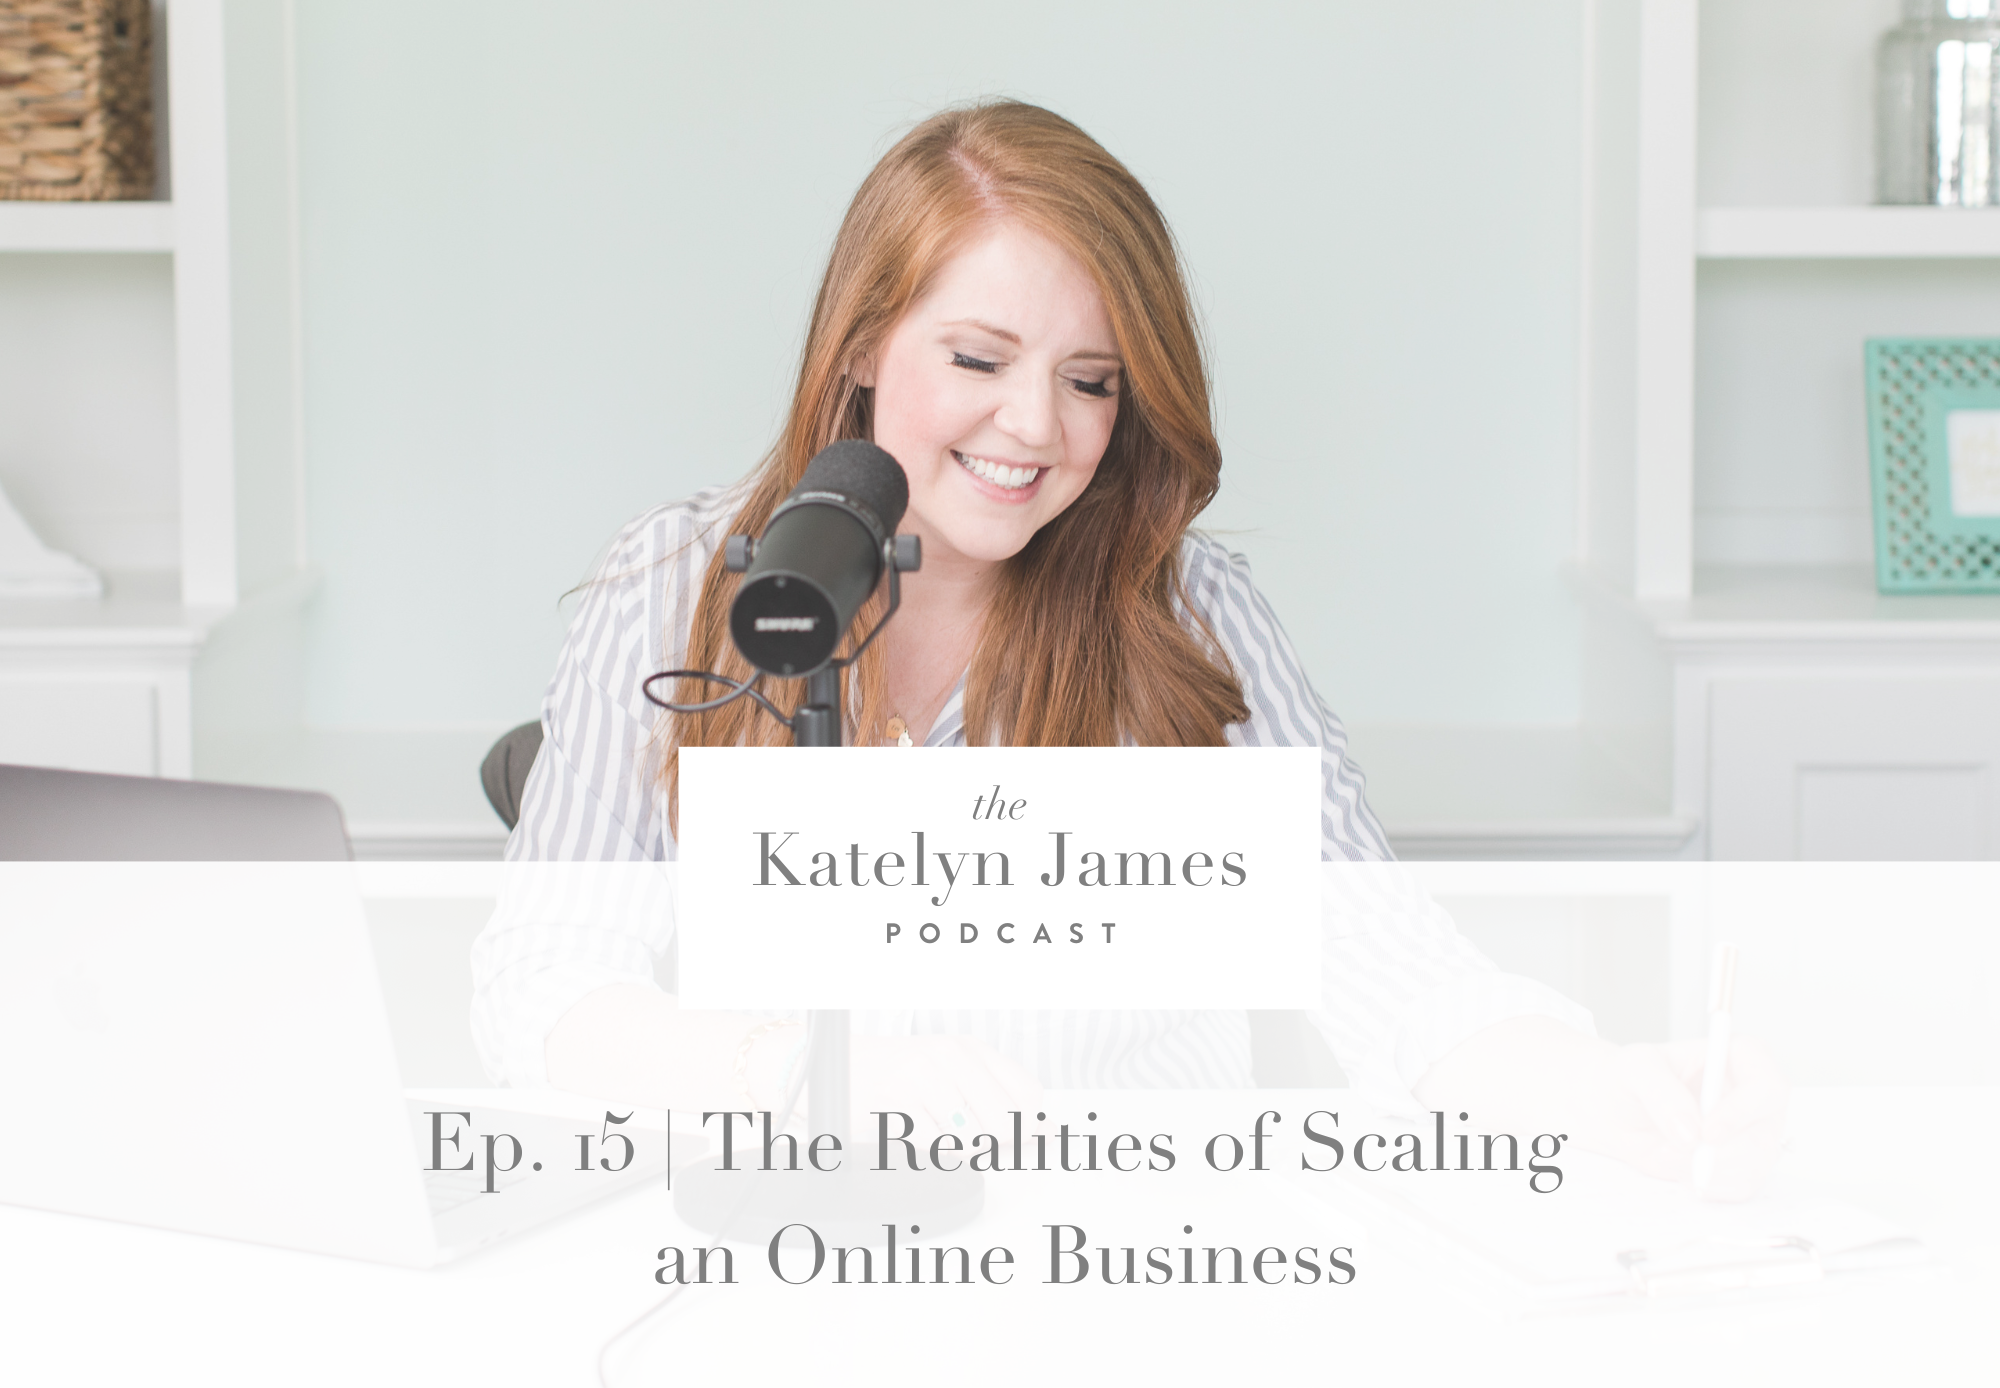 Ep. 15 | The Realities of Scaling an Online Business